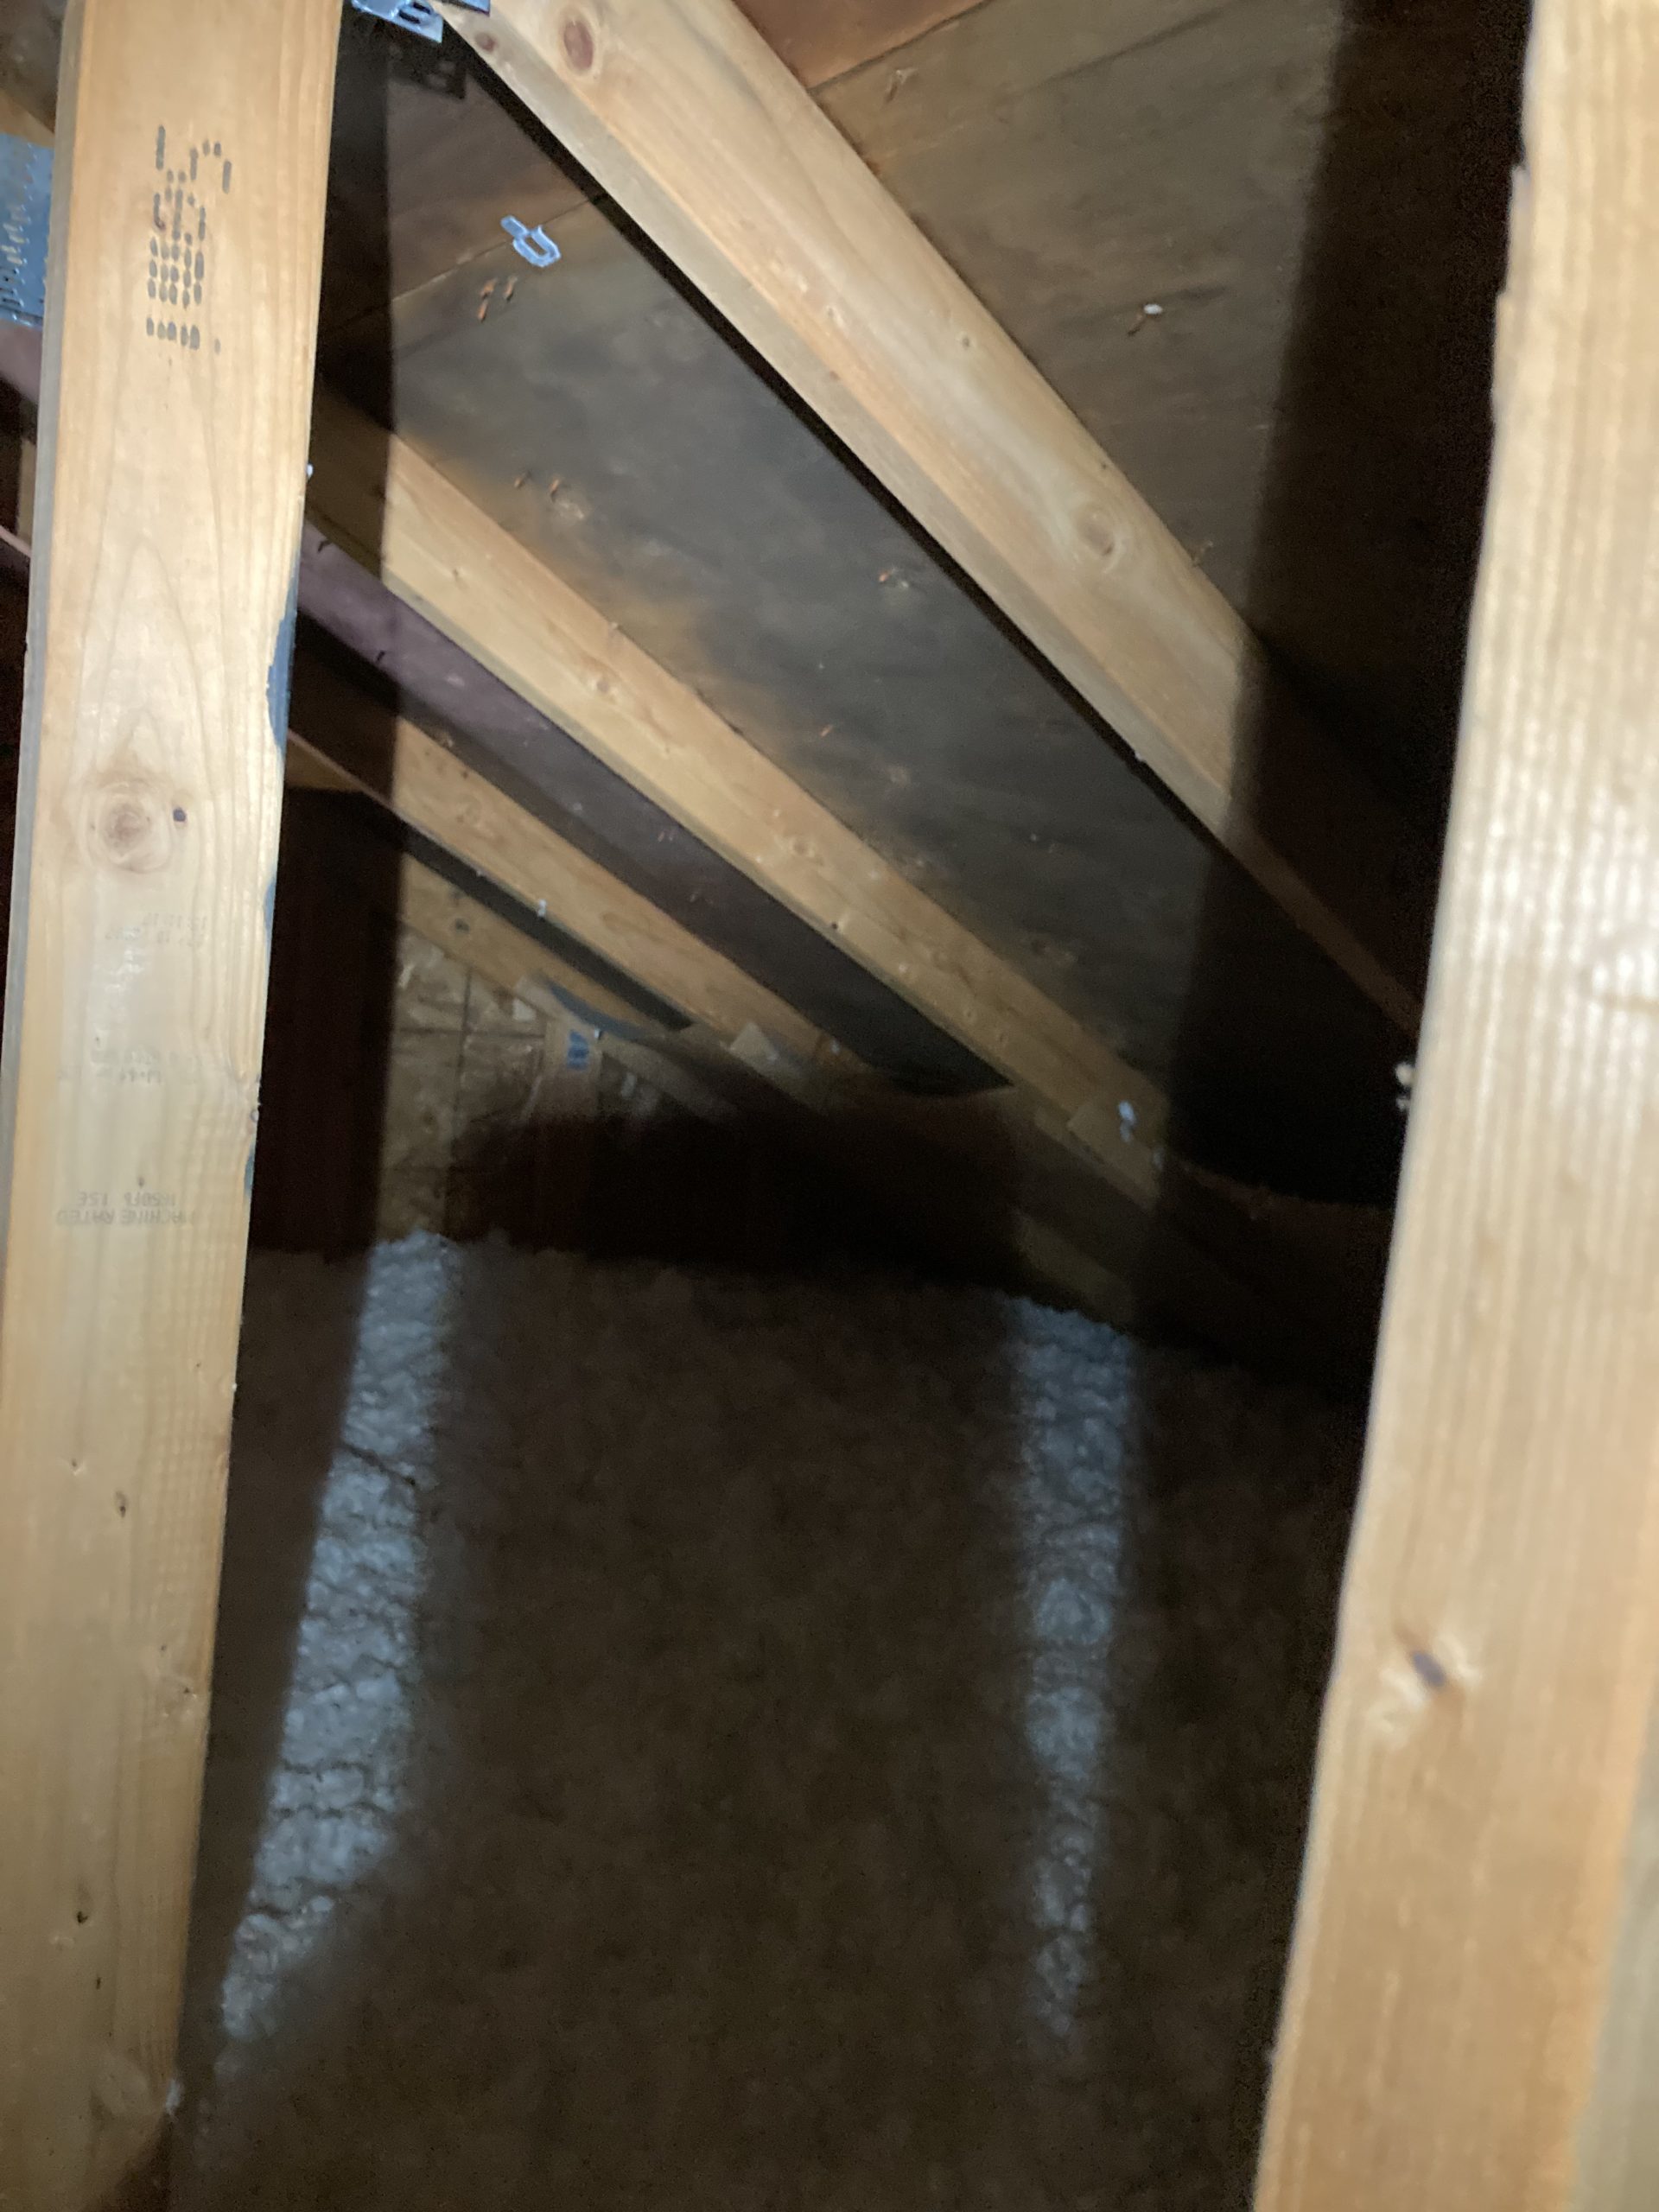 How do you test for mold in the attic